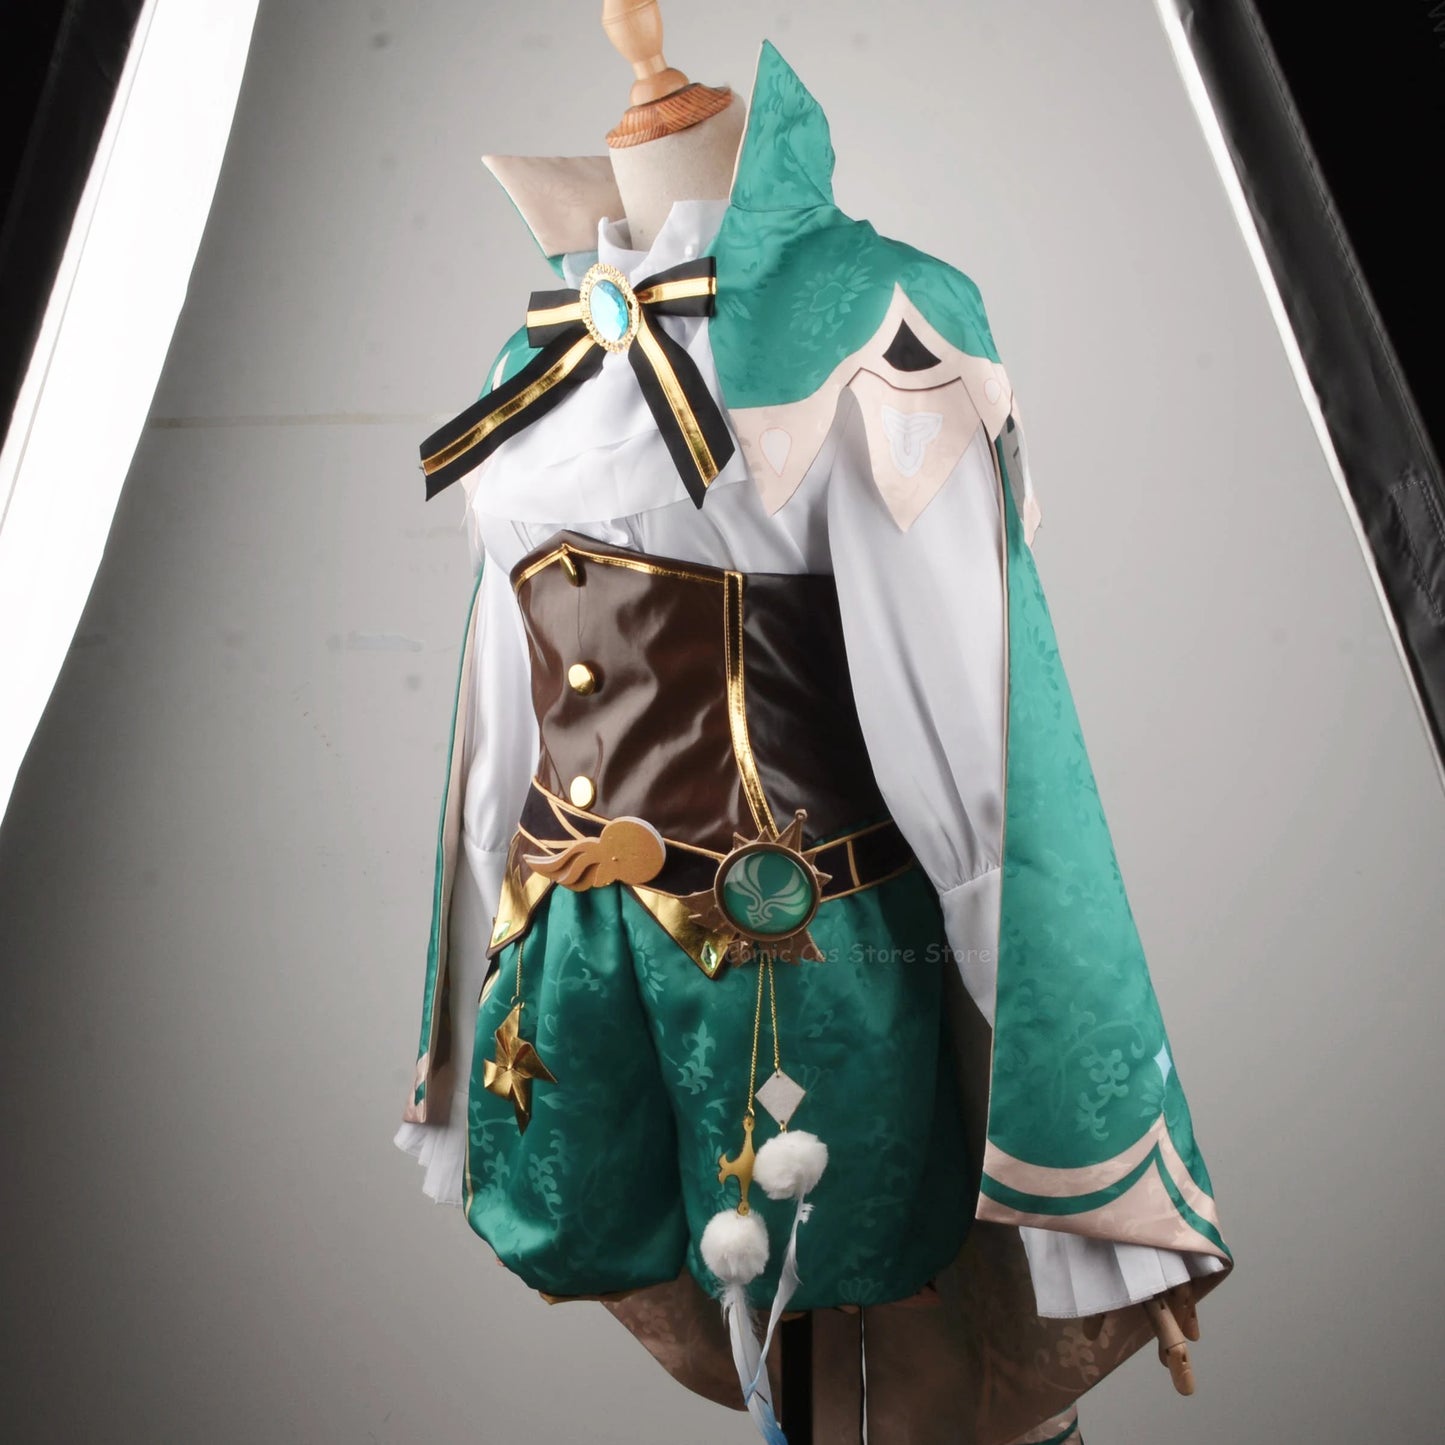 NEW Hot Game Genshin Impact Cosplay Venti Costume Wig Mondstadt Wind God Game Uniform  Lovely Outfit XS-XXL